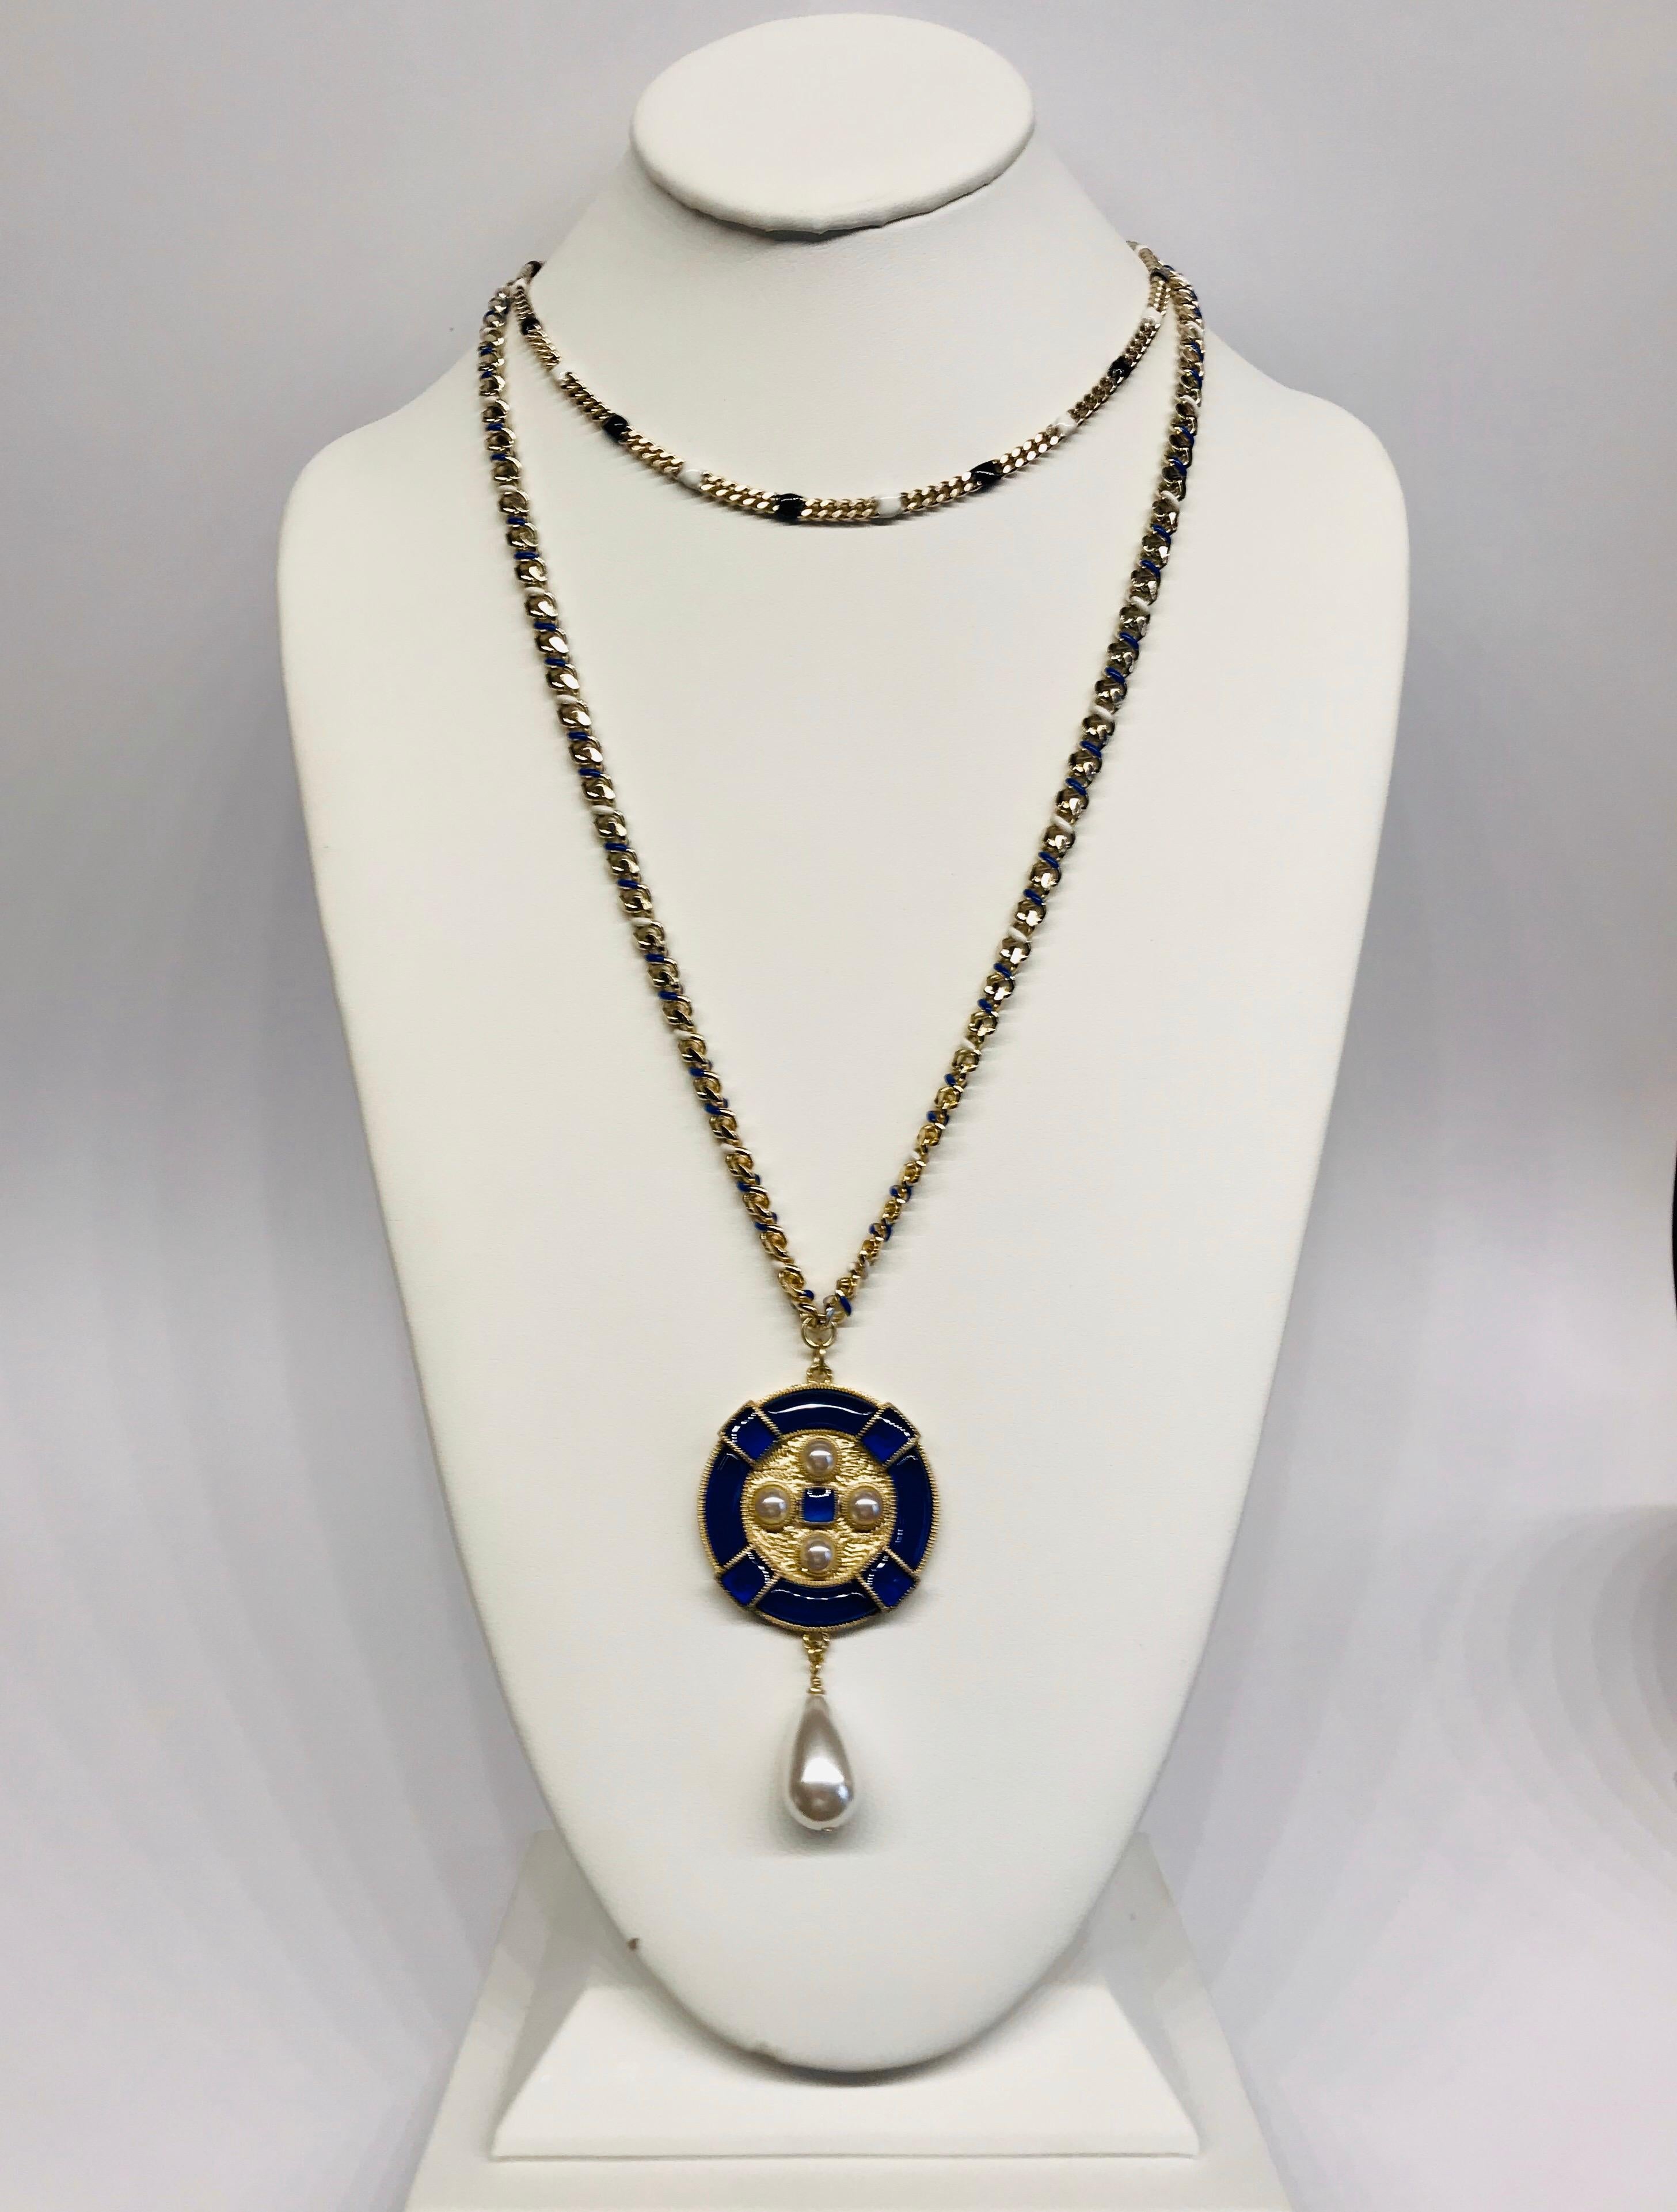 Chanel 2019 Cruise Collection 2 Stand Pendant Necklace For Sale 4